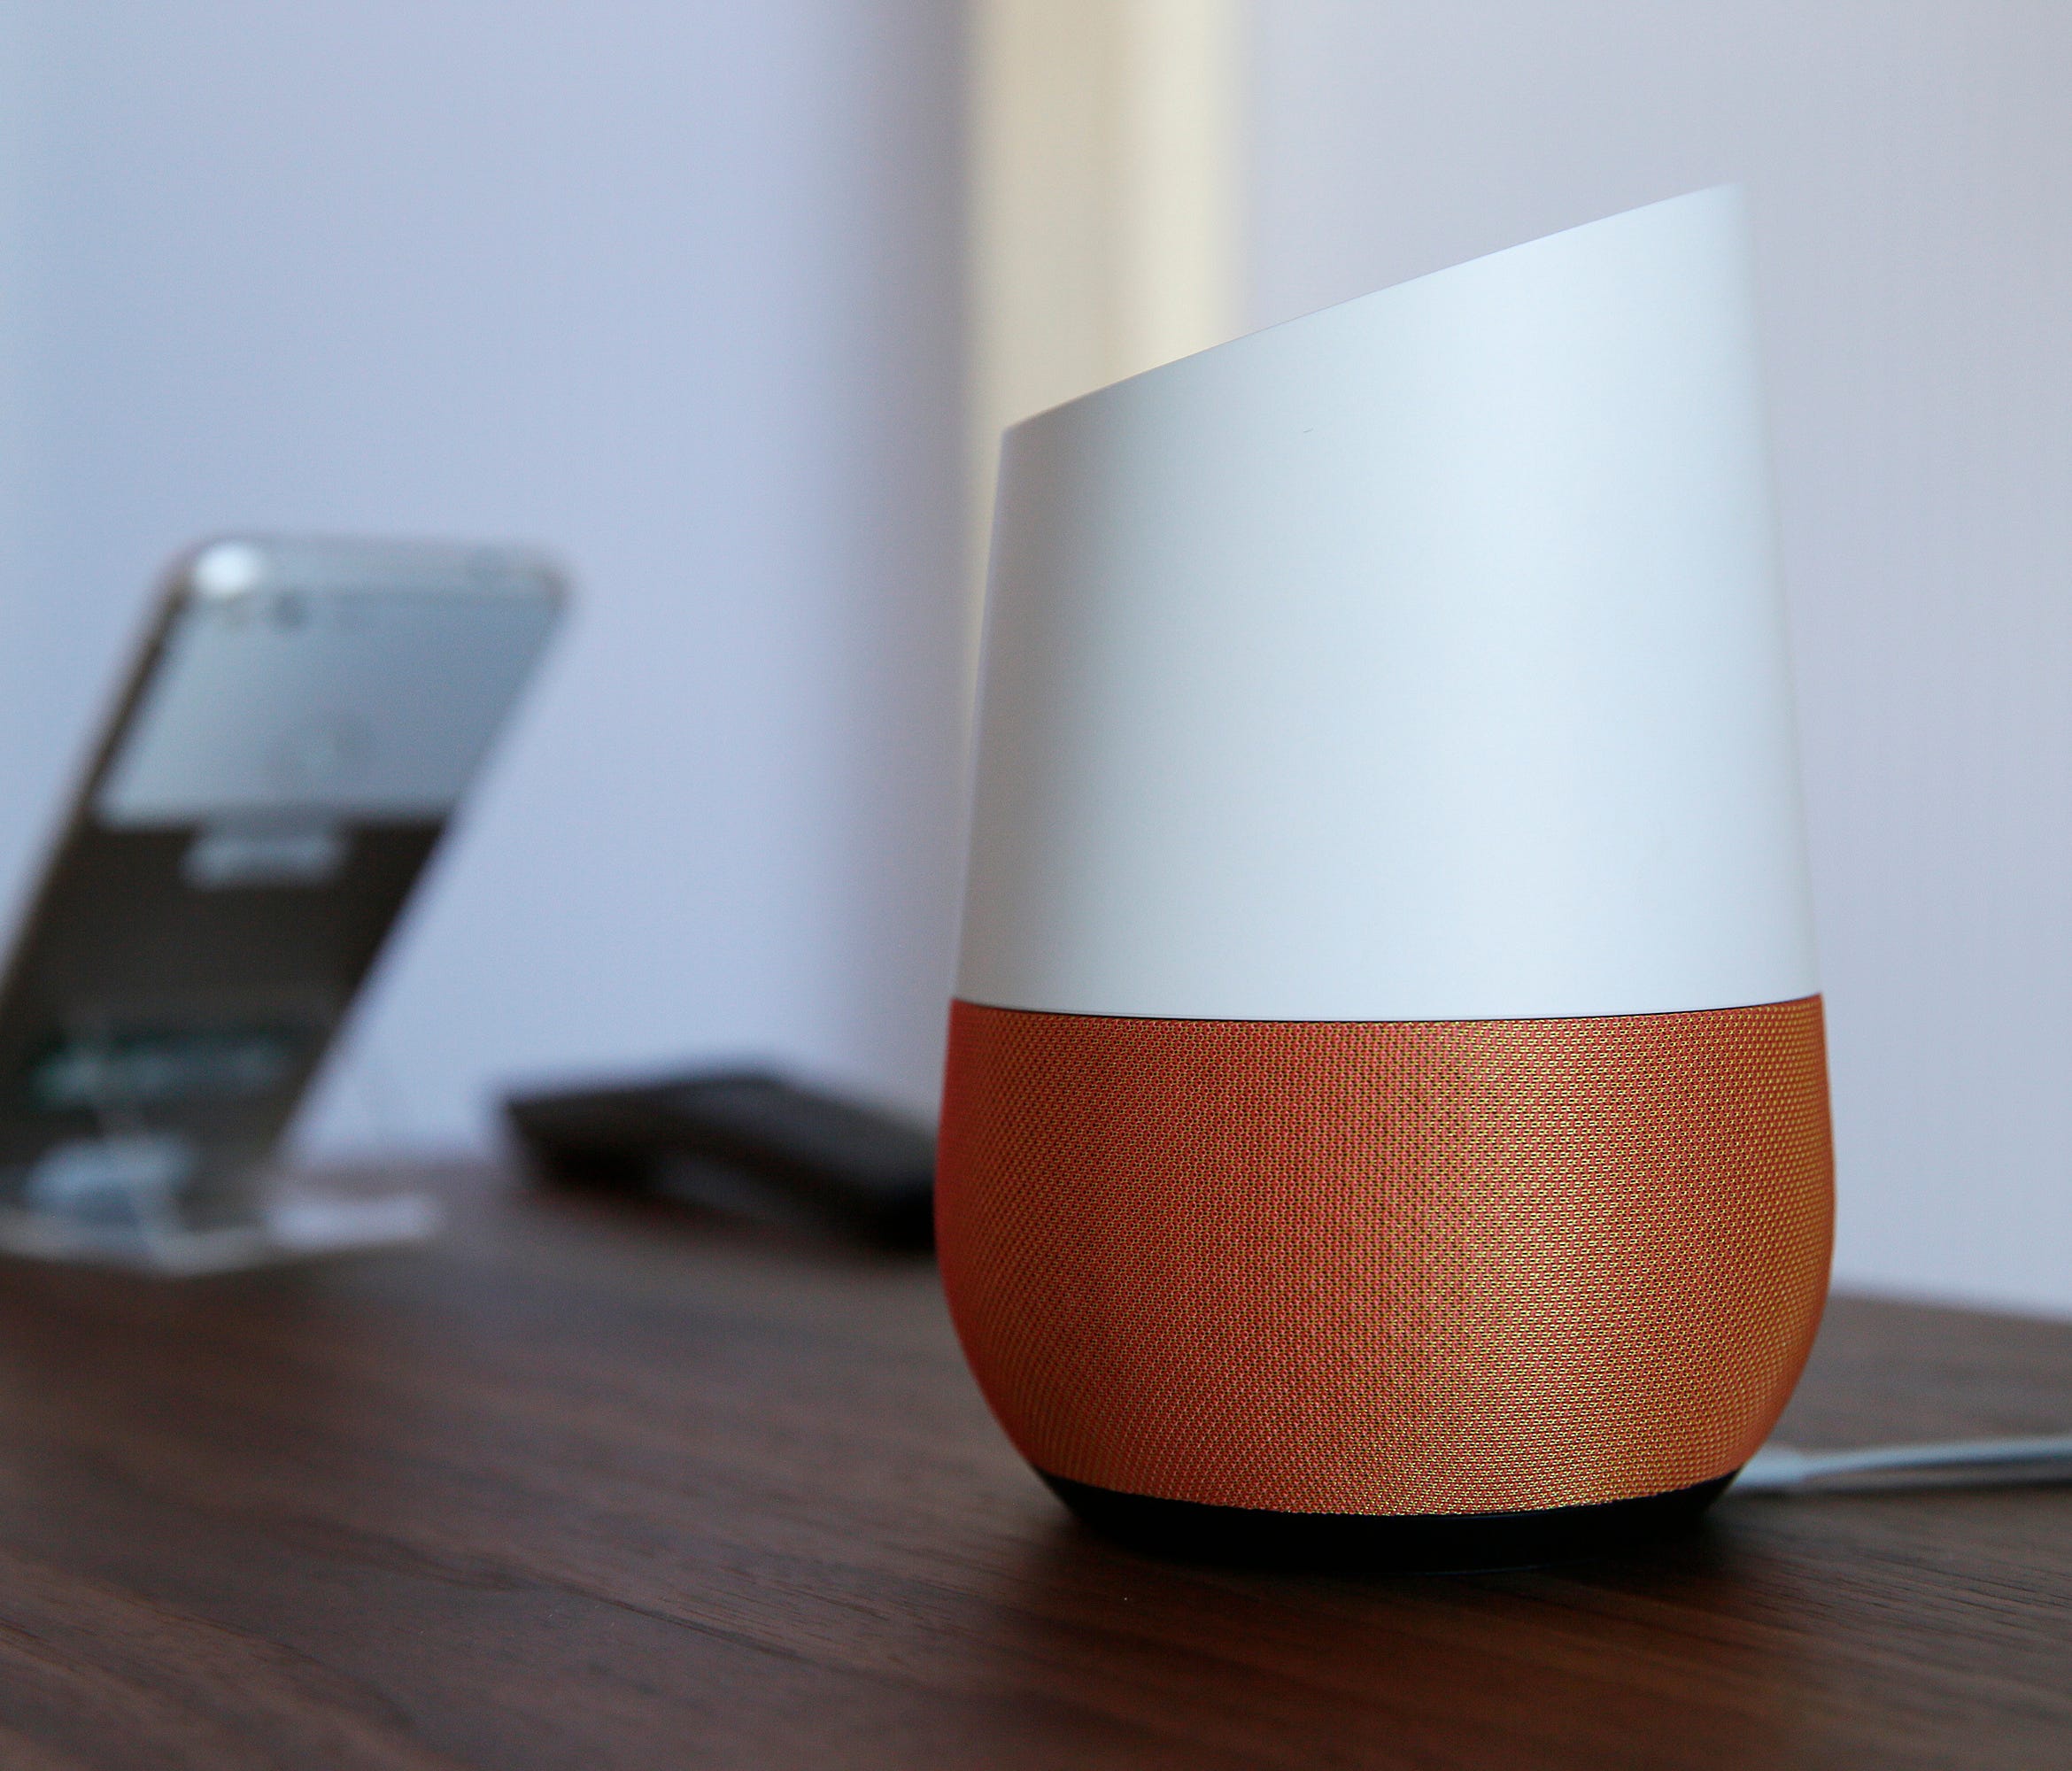 Google is expected to introduce new features to Google Home at its I/O event in Mountain View, Calif., starting Wednesday.